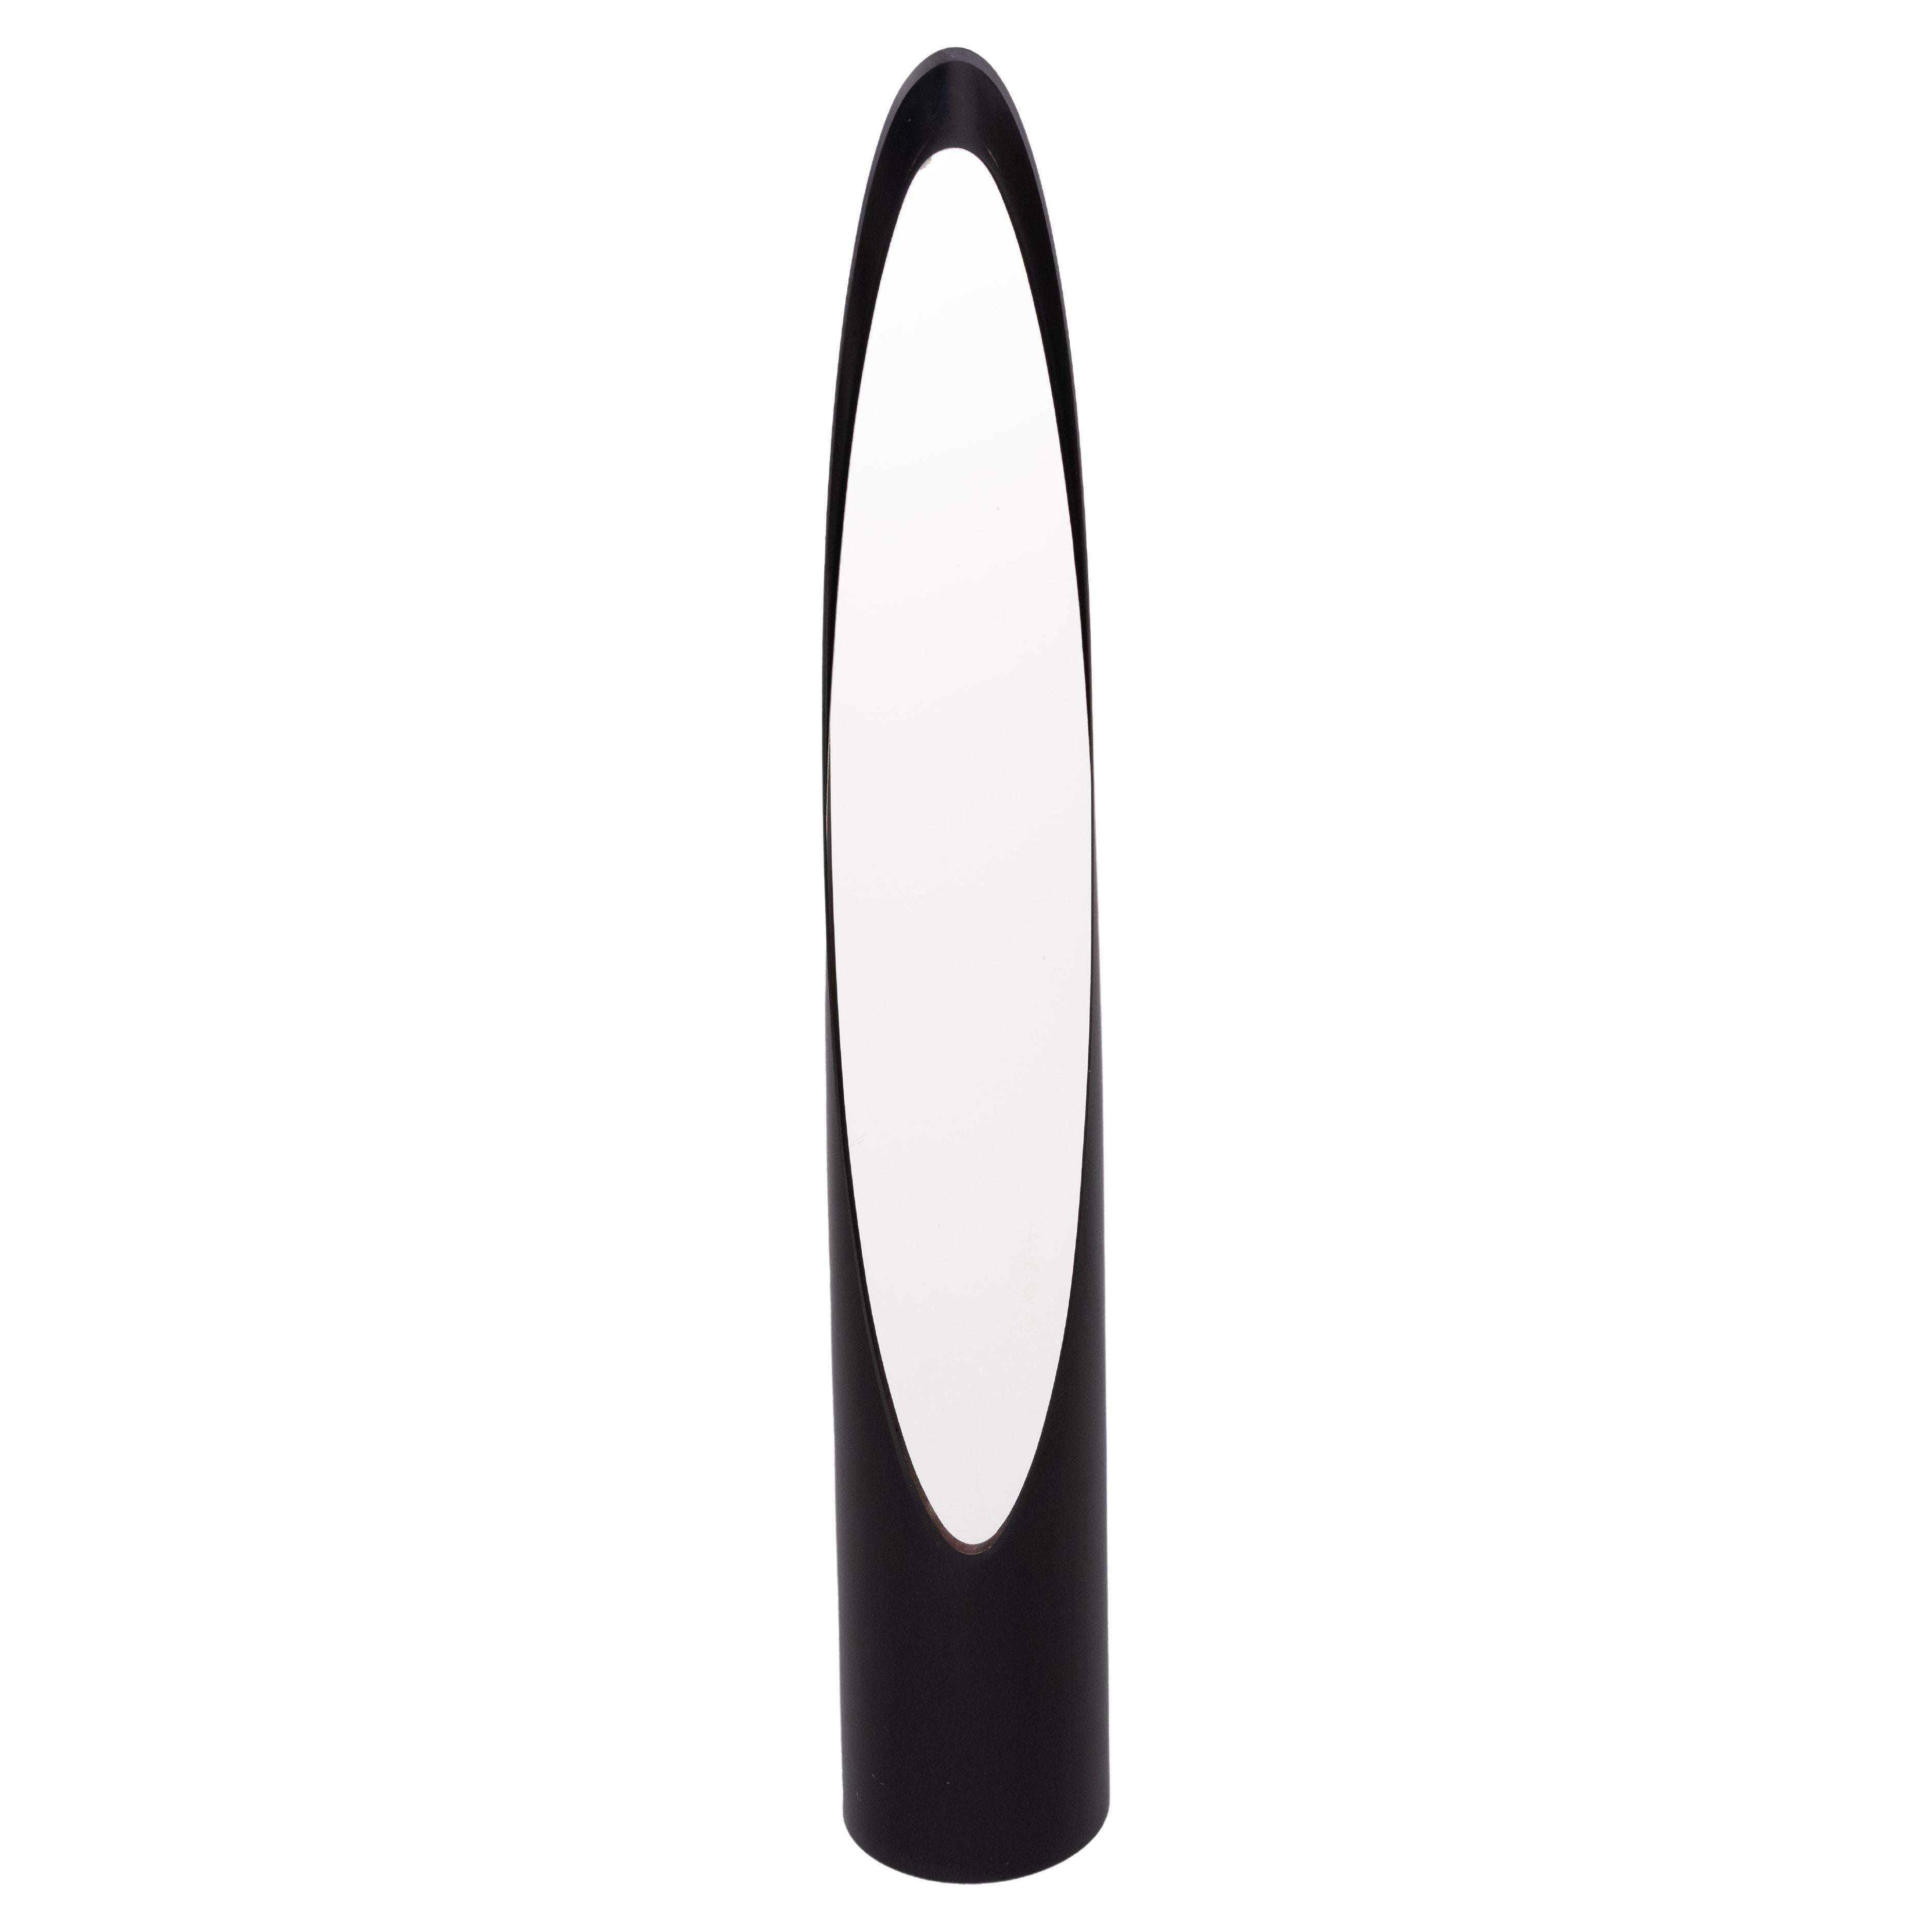 Very nice Full Length Lipstick Mirror . Black color .Round shaped .
1970s Space Ace in style .  